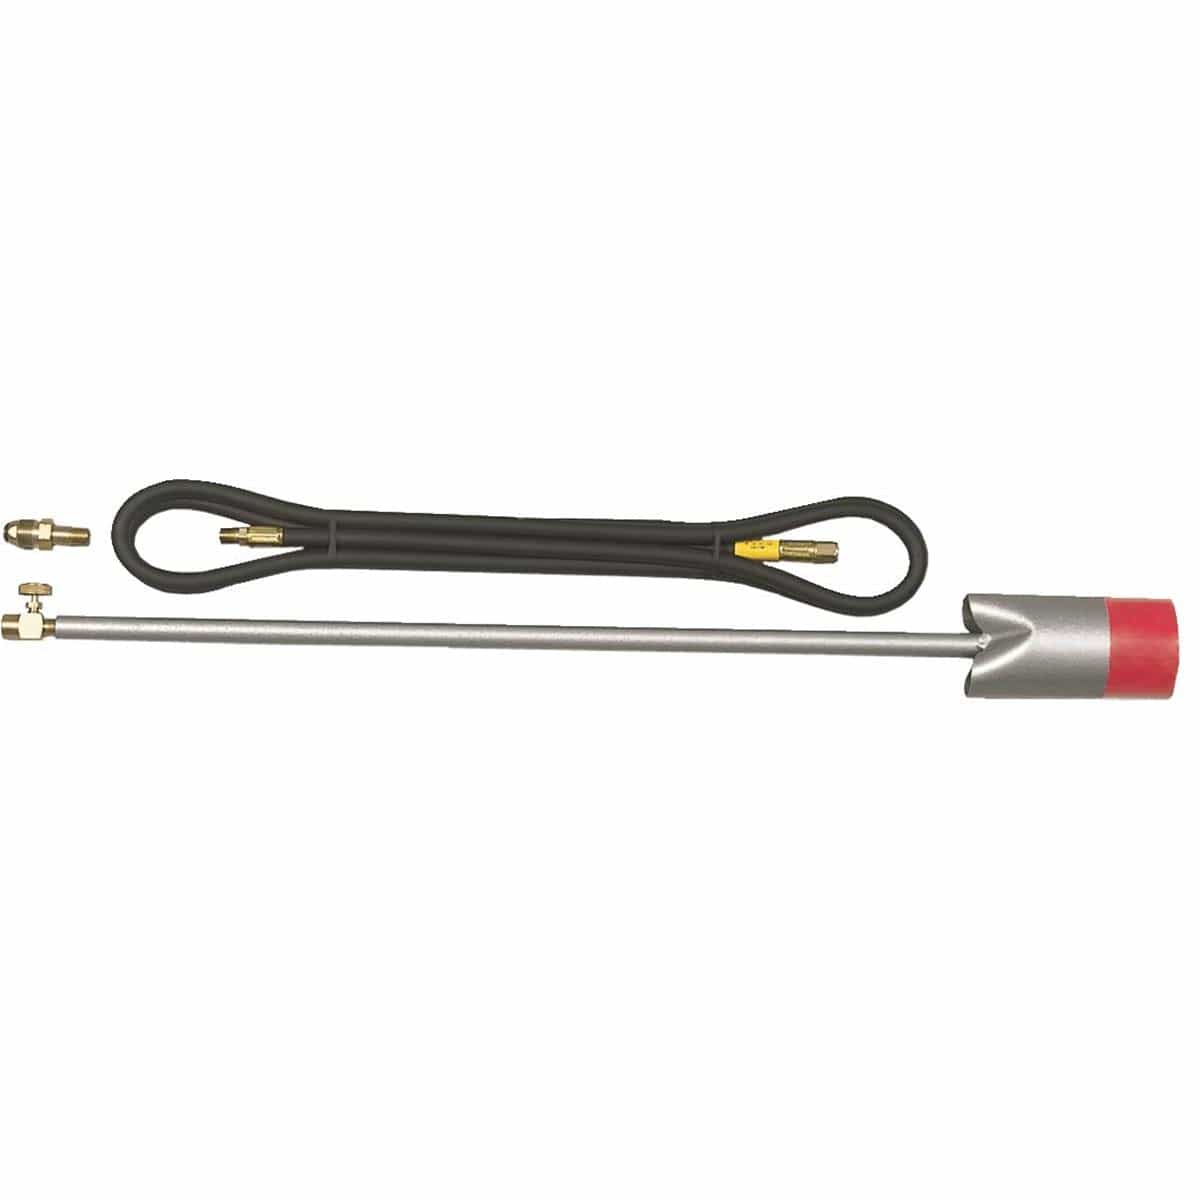 Red Dragon® FLAME ENGINEERING Weed Burner Torch